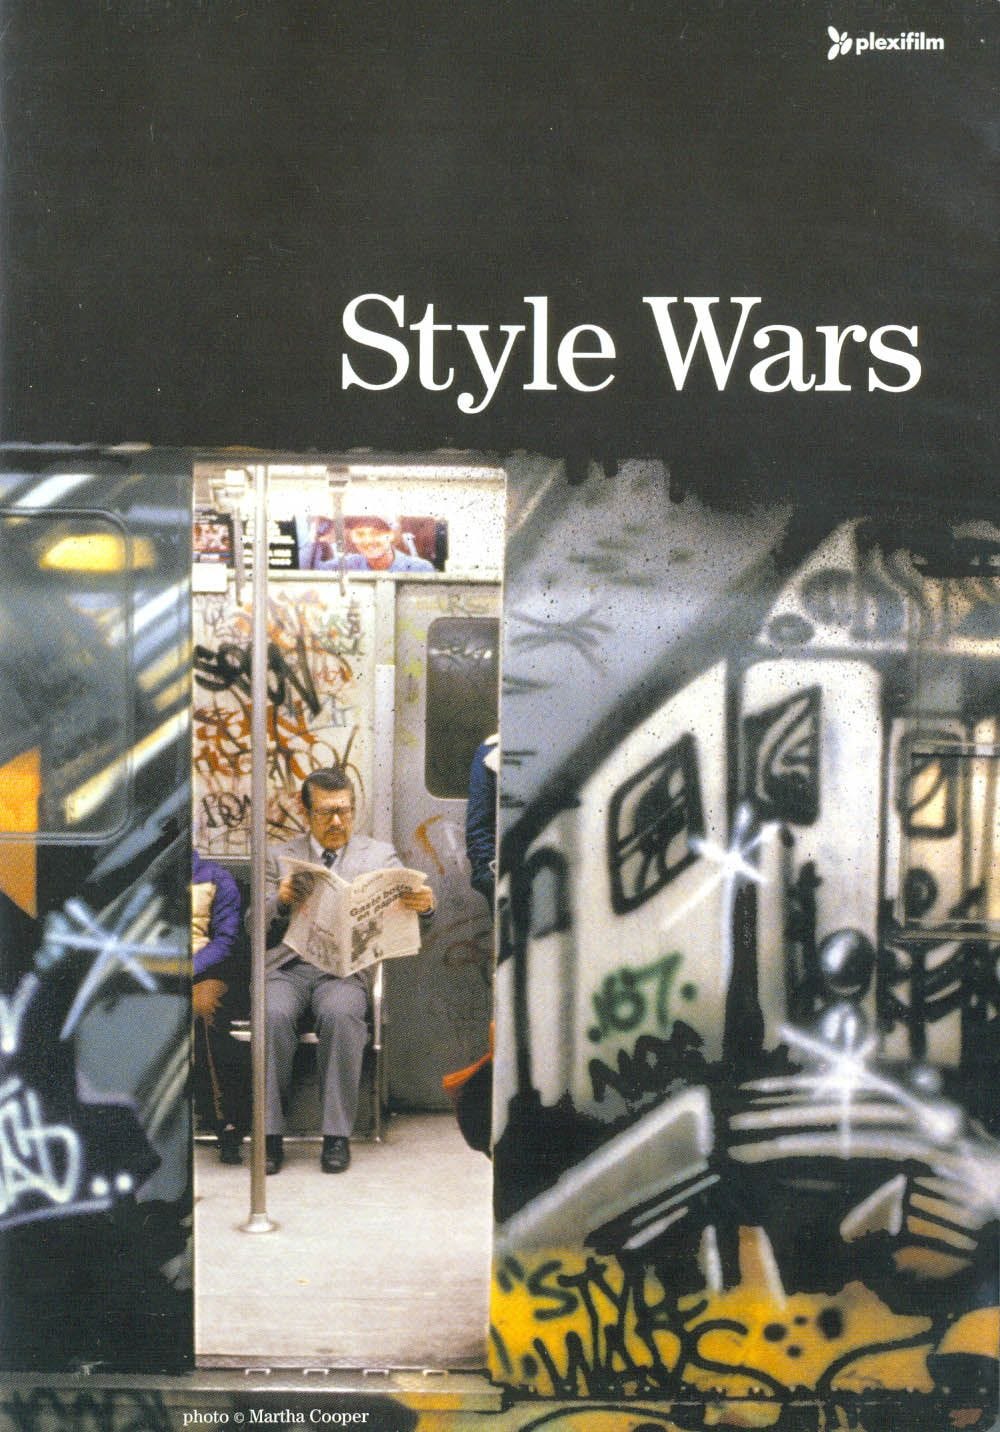 Style Wars & Wild Style: Preserving Hip-Hop Culture in Film | by  Afrovisualism | Medium